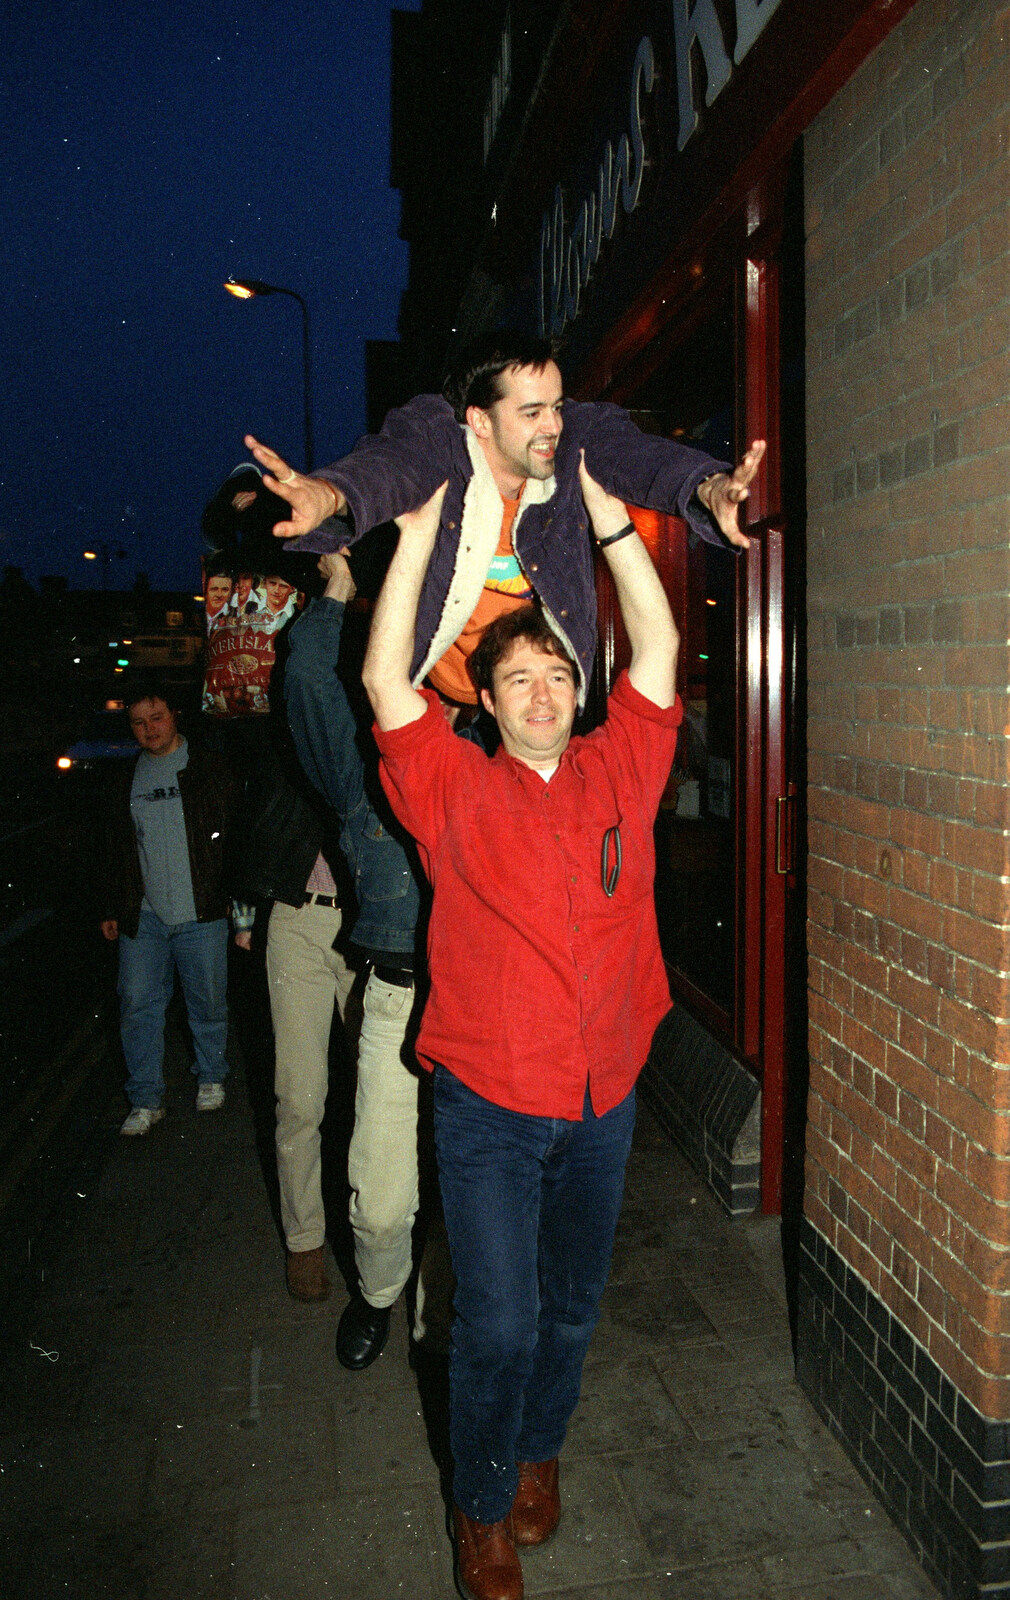 CISU, Los Mexicanos and the Inflatable Woman, Ipswich, Suffolk - 25th April 1996: Trev swims past Clown's Restaurant on Falcon Street in Ipswich